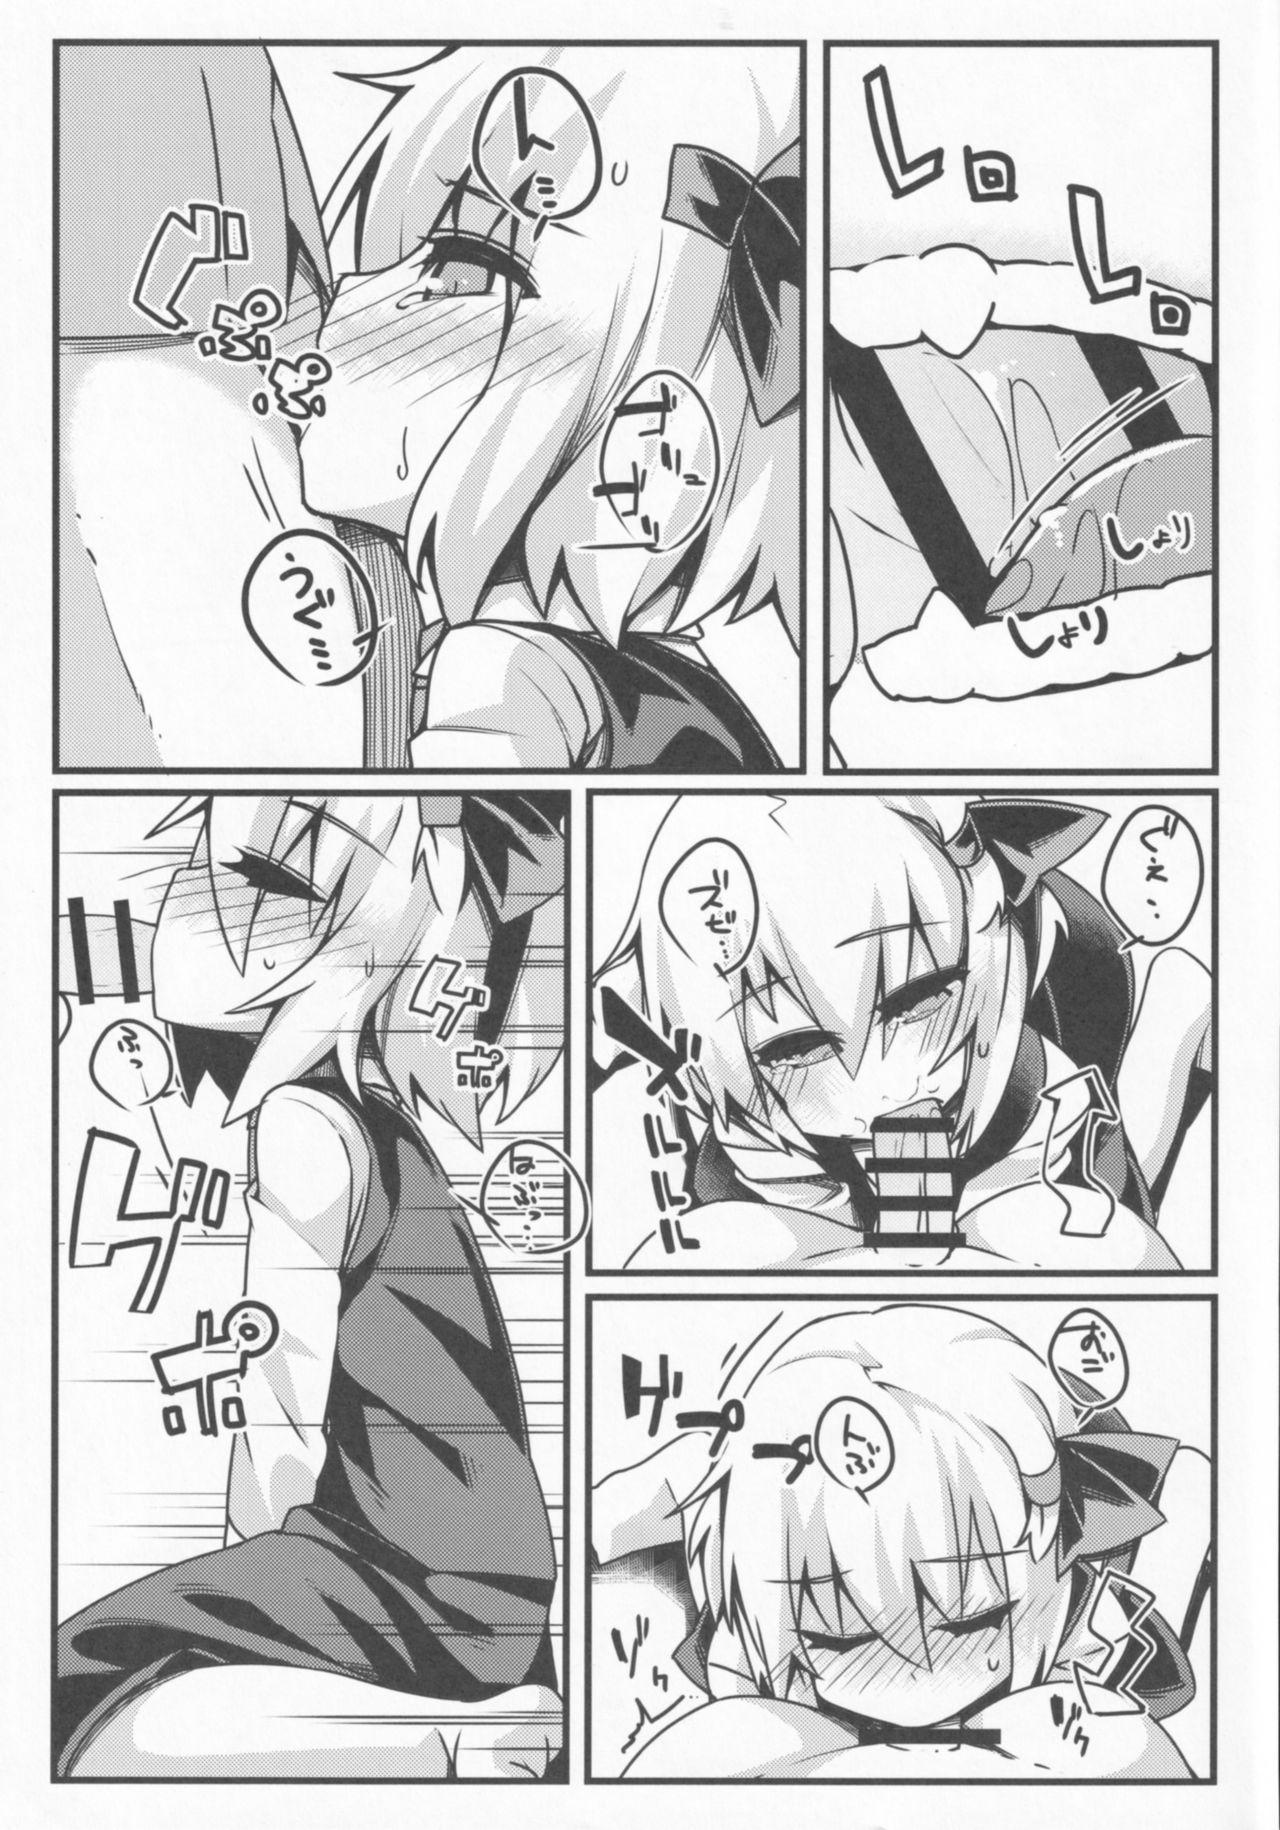 Colombia Rumia Keiken +2 - Touhou project Deepthroat - Page 4